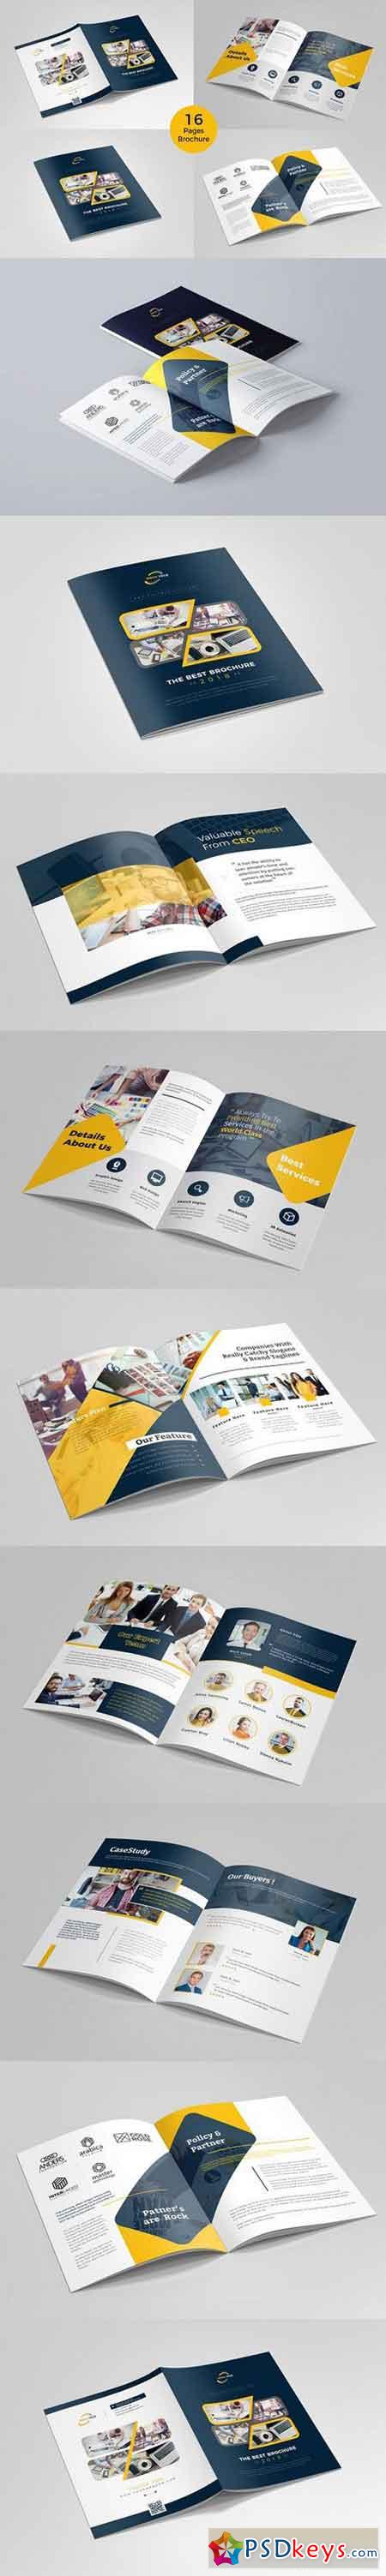 Brochure Template - 16 pages 1495504